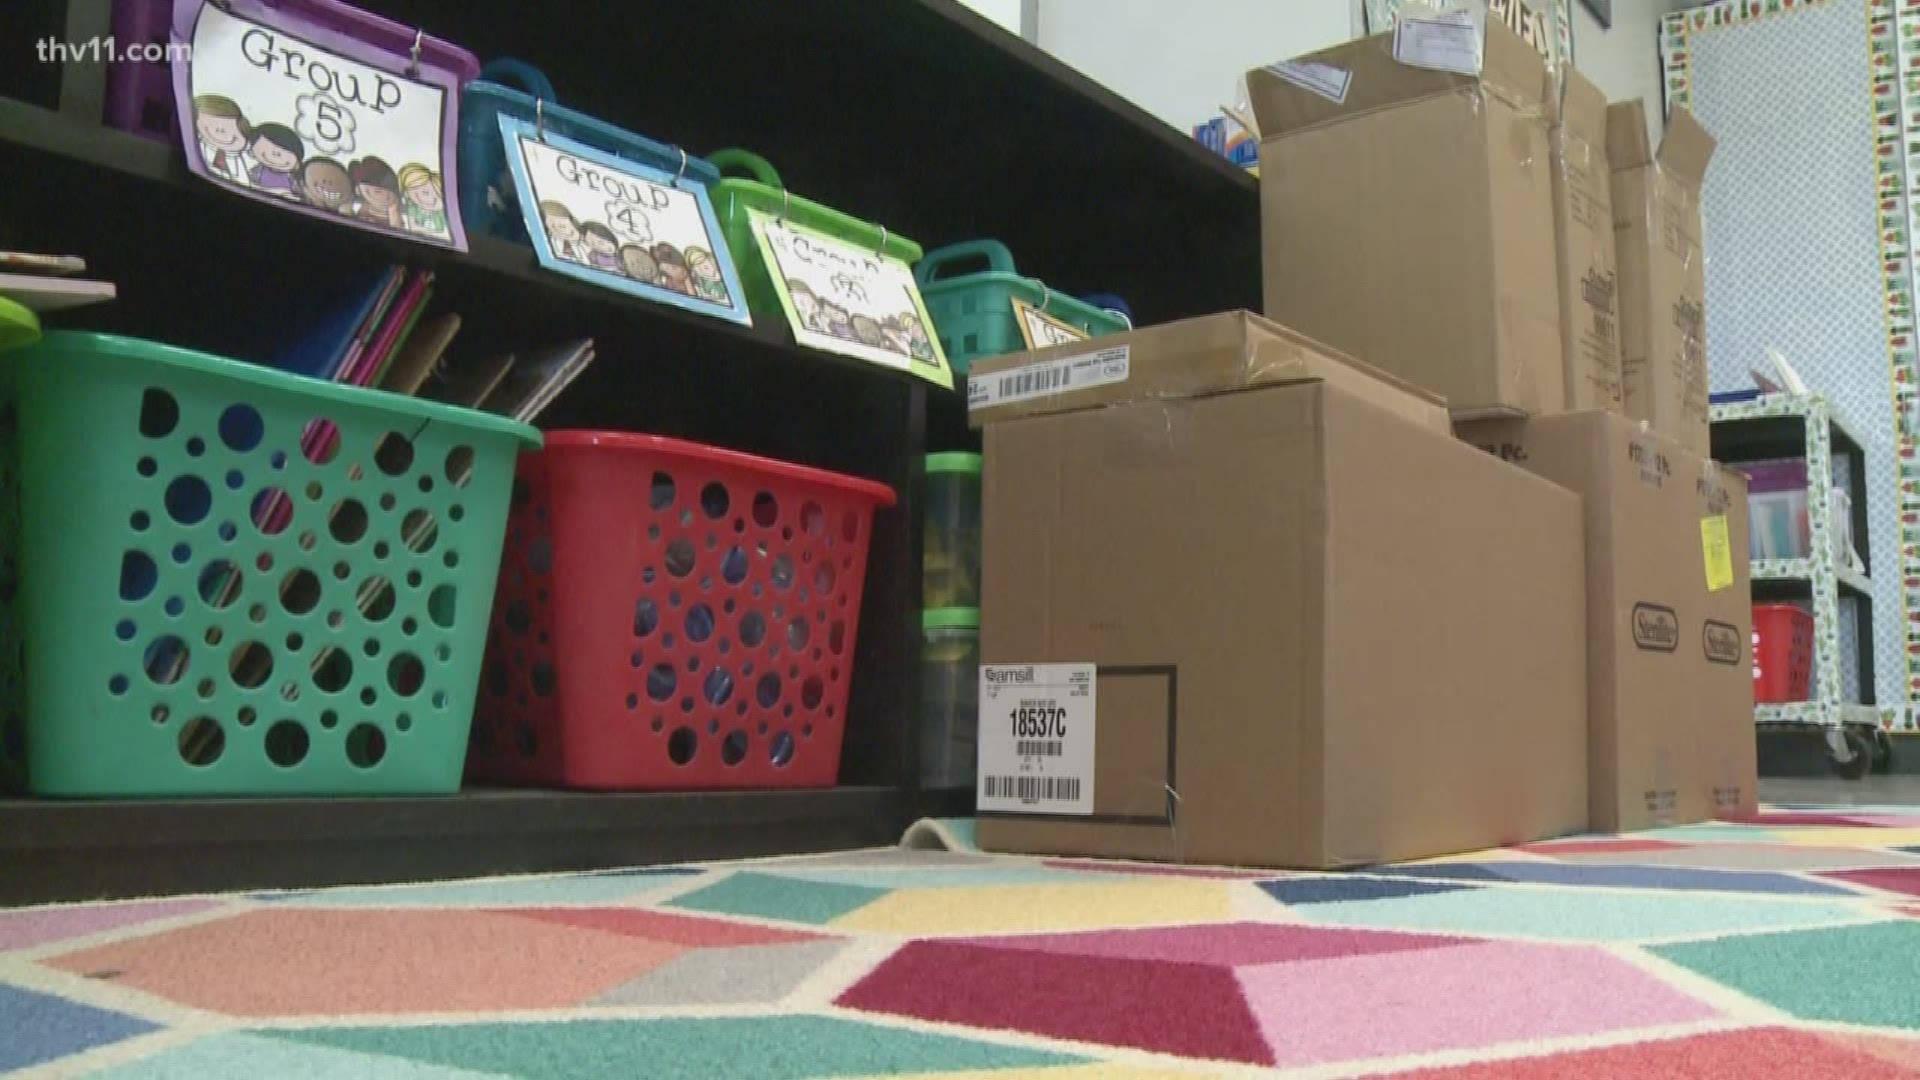 While most parents are busy collecting all the school supplies their child needs for the upcoming school year, parents in Greenbrier are relaxed.